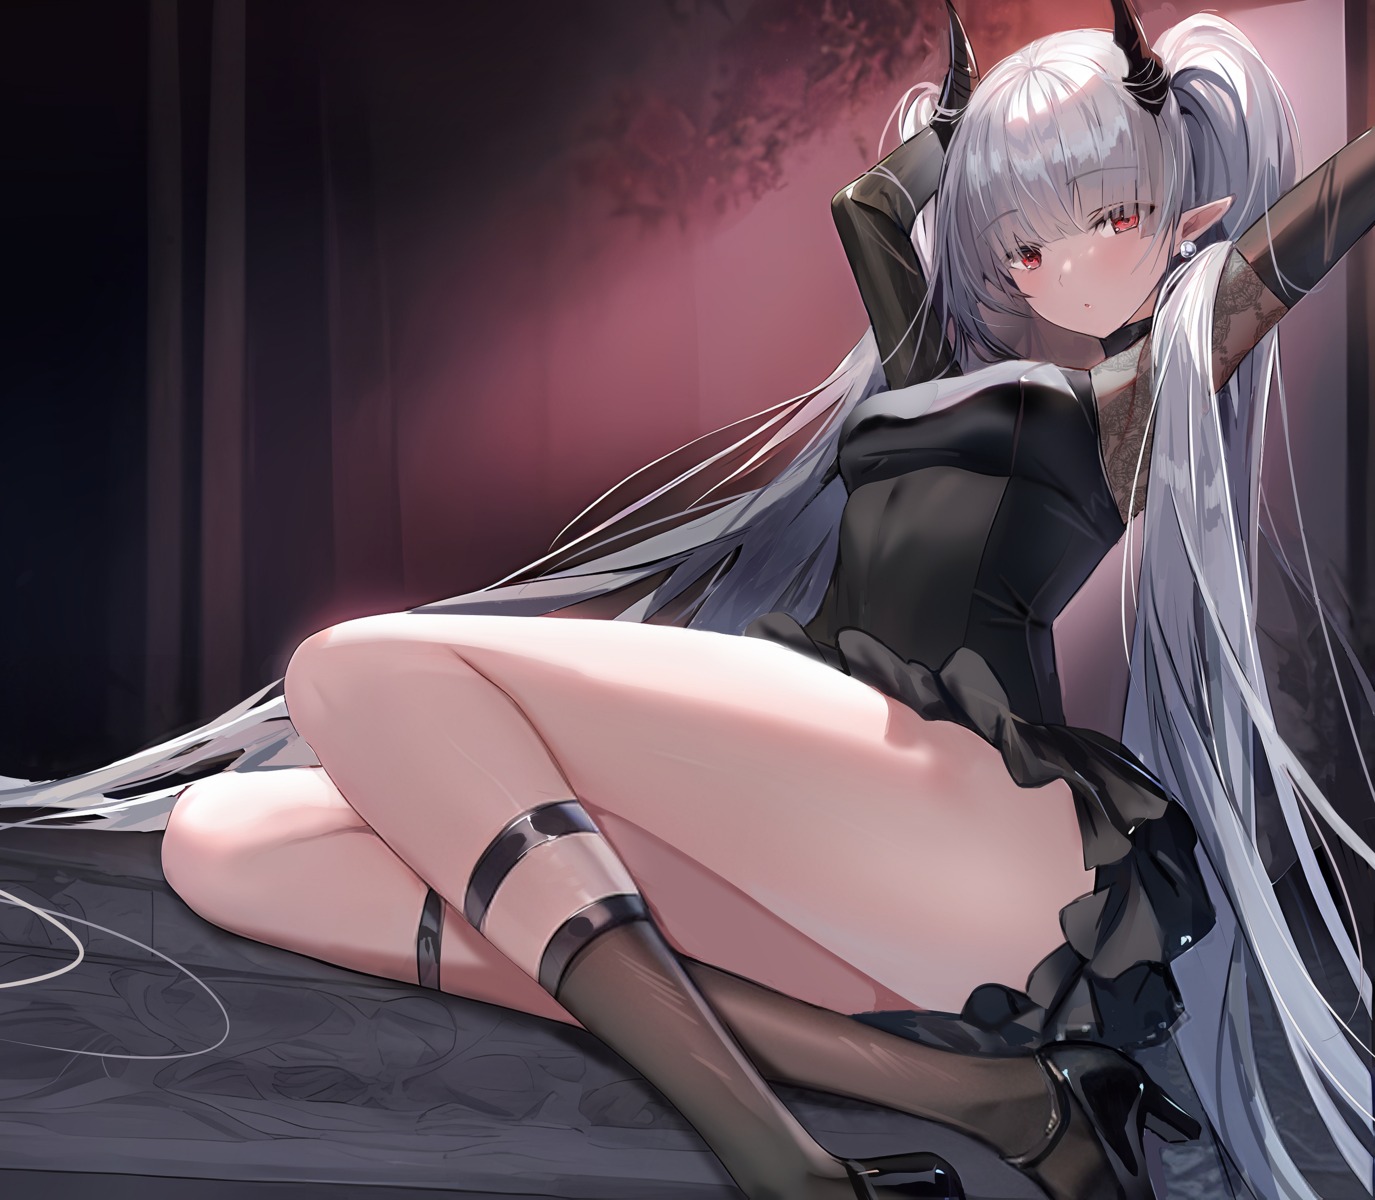 arknights chained_sarkaz_girl dress heels horns pointy_ears see_through shanguier skirt_lift